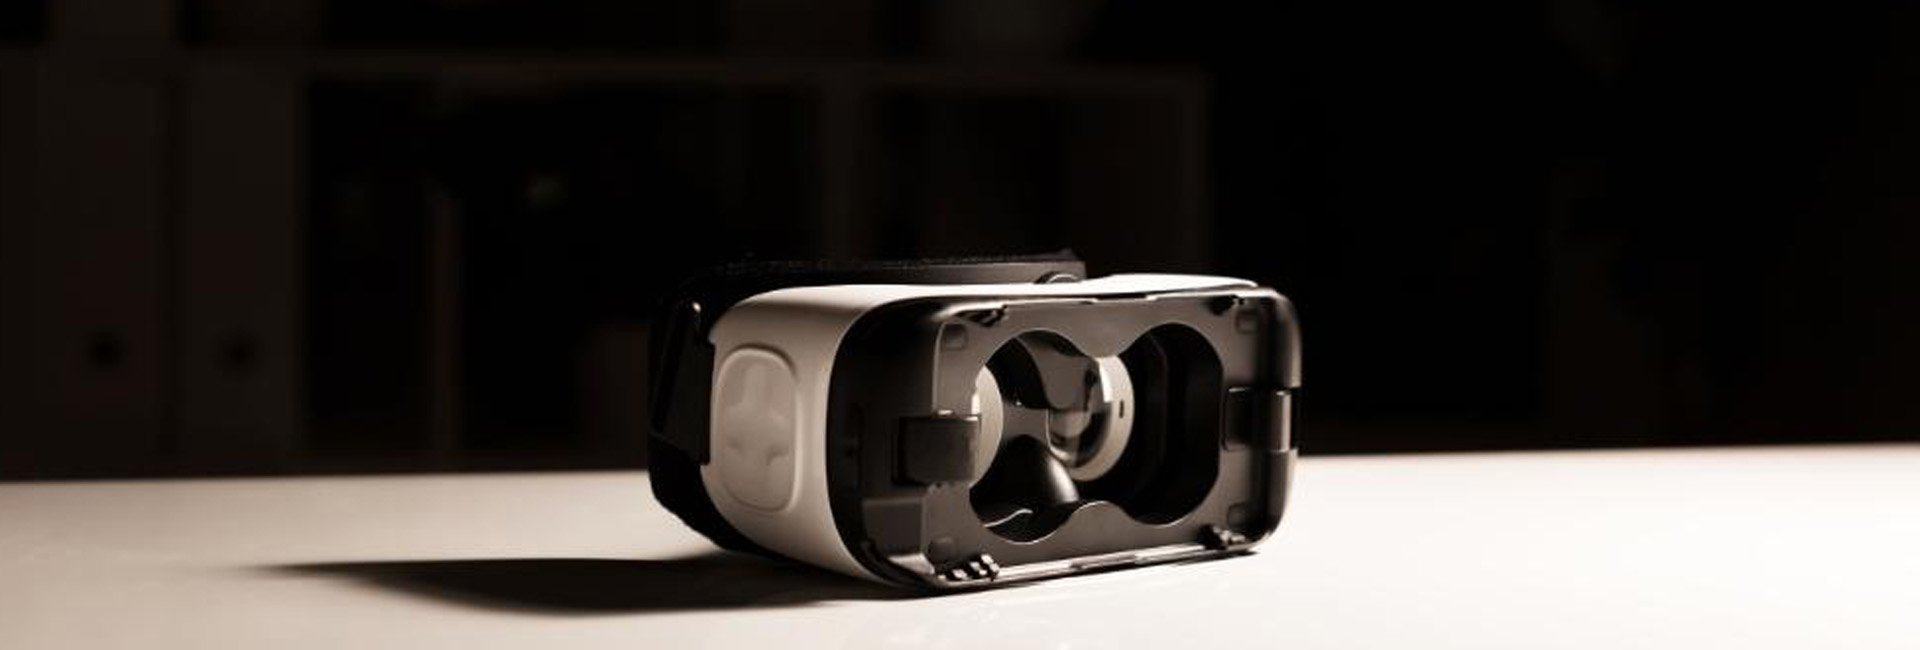 black and white image of 3d goggles on a white tabletop with light coming from the right and casting a long shadow